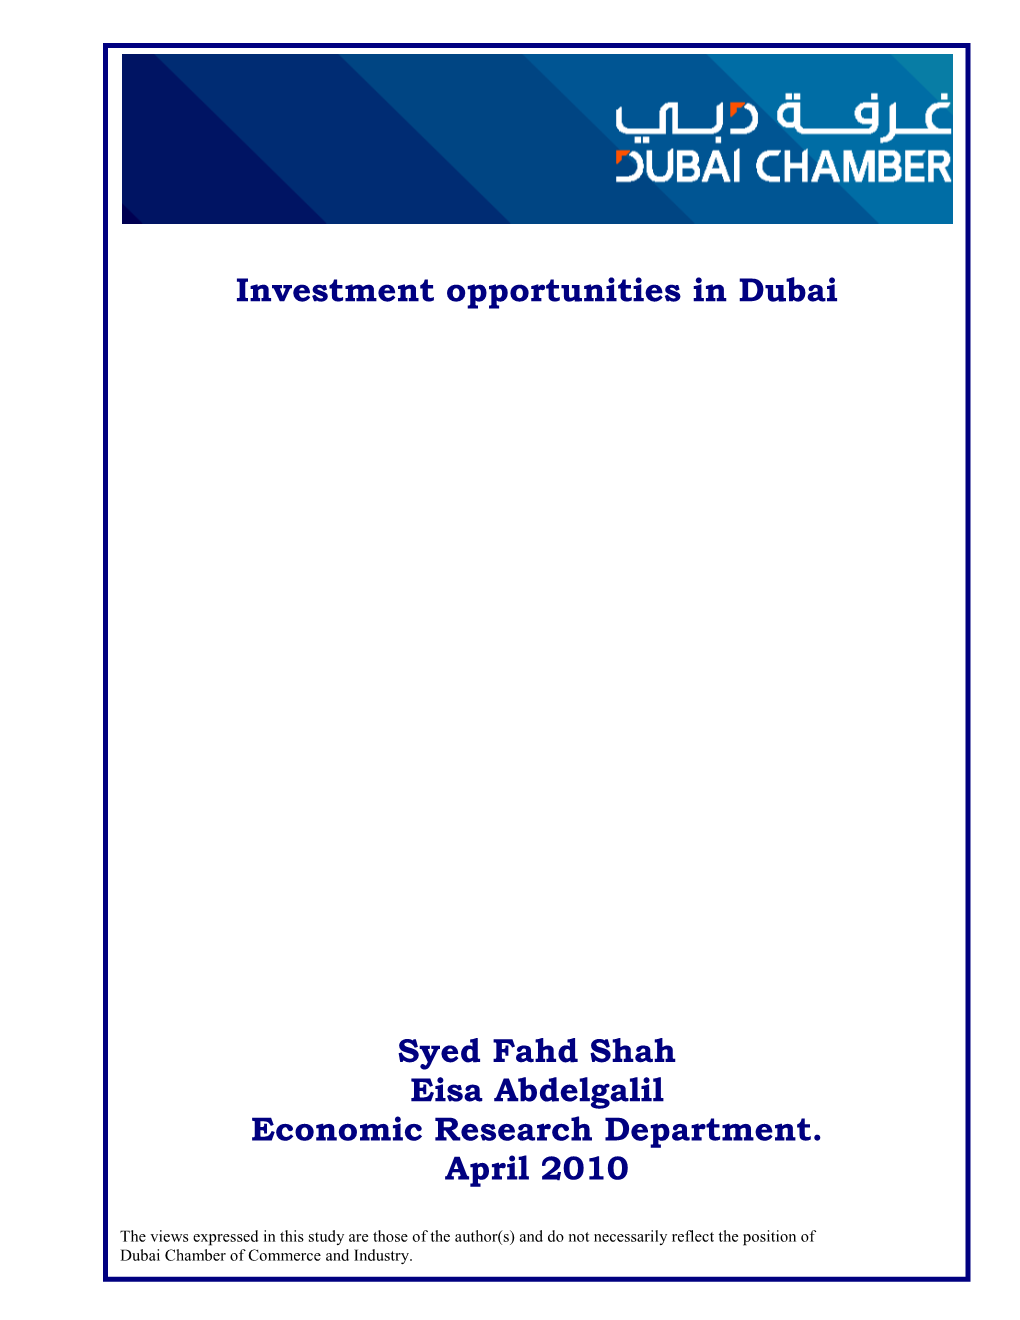 Investment Opportunities in Dubai Syed Fahd Shah Eisa Abdelgalil Economic Research Department. April 2010